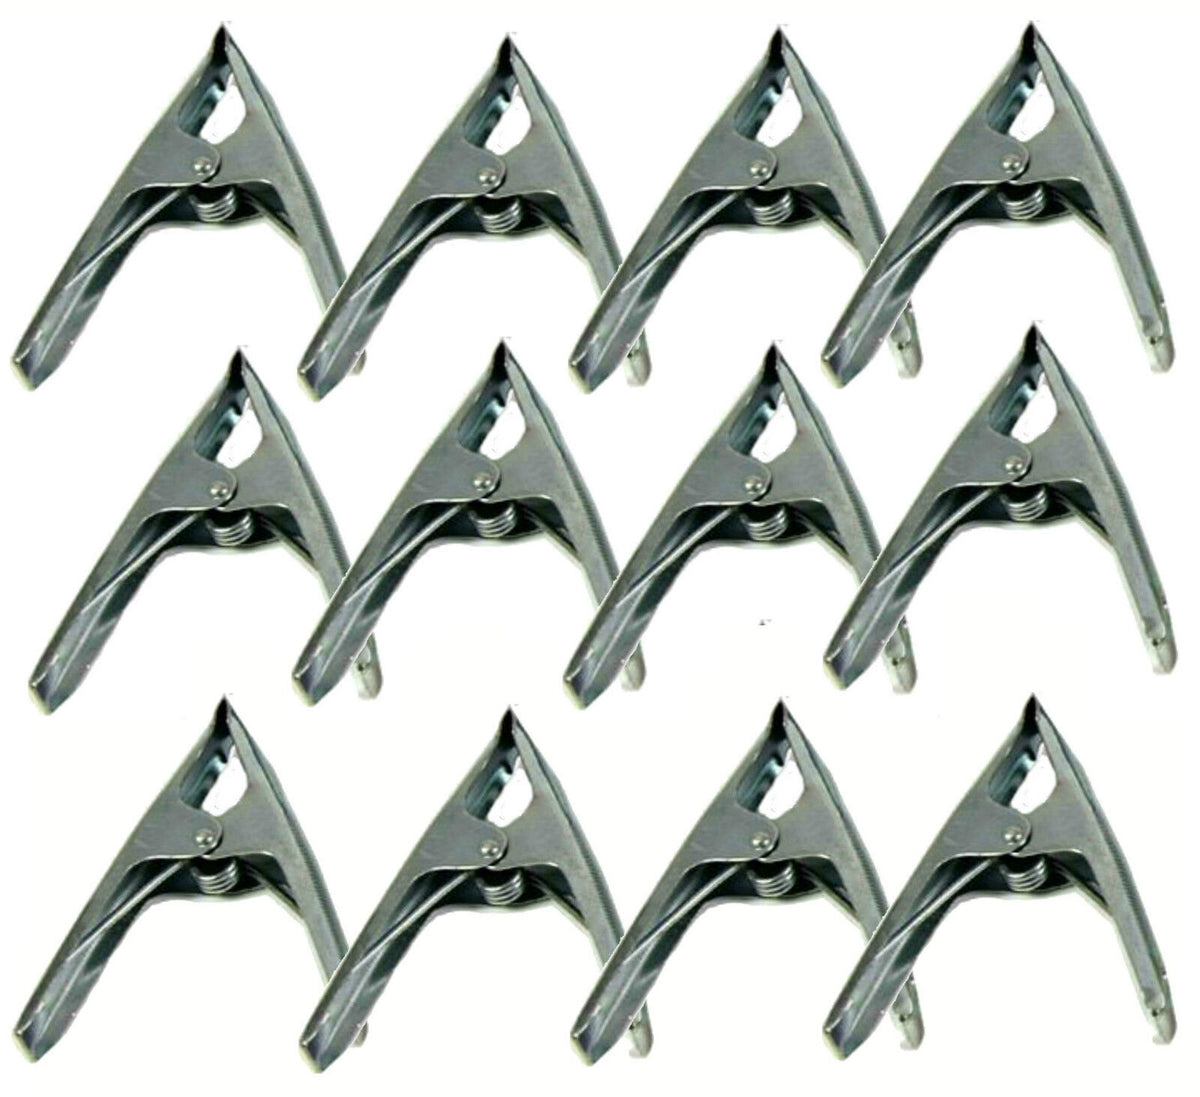 12 x 6" Market Stall Spring Clamps Large Metal Heavy Duty Clips Tarpaulin Sheet